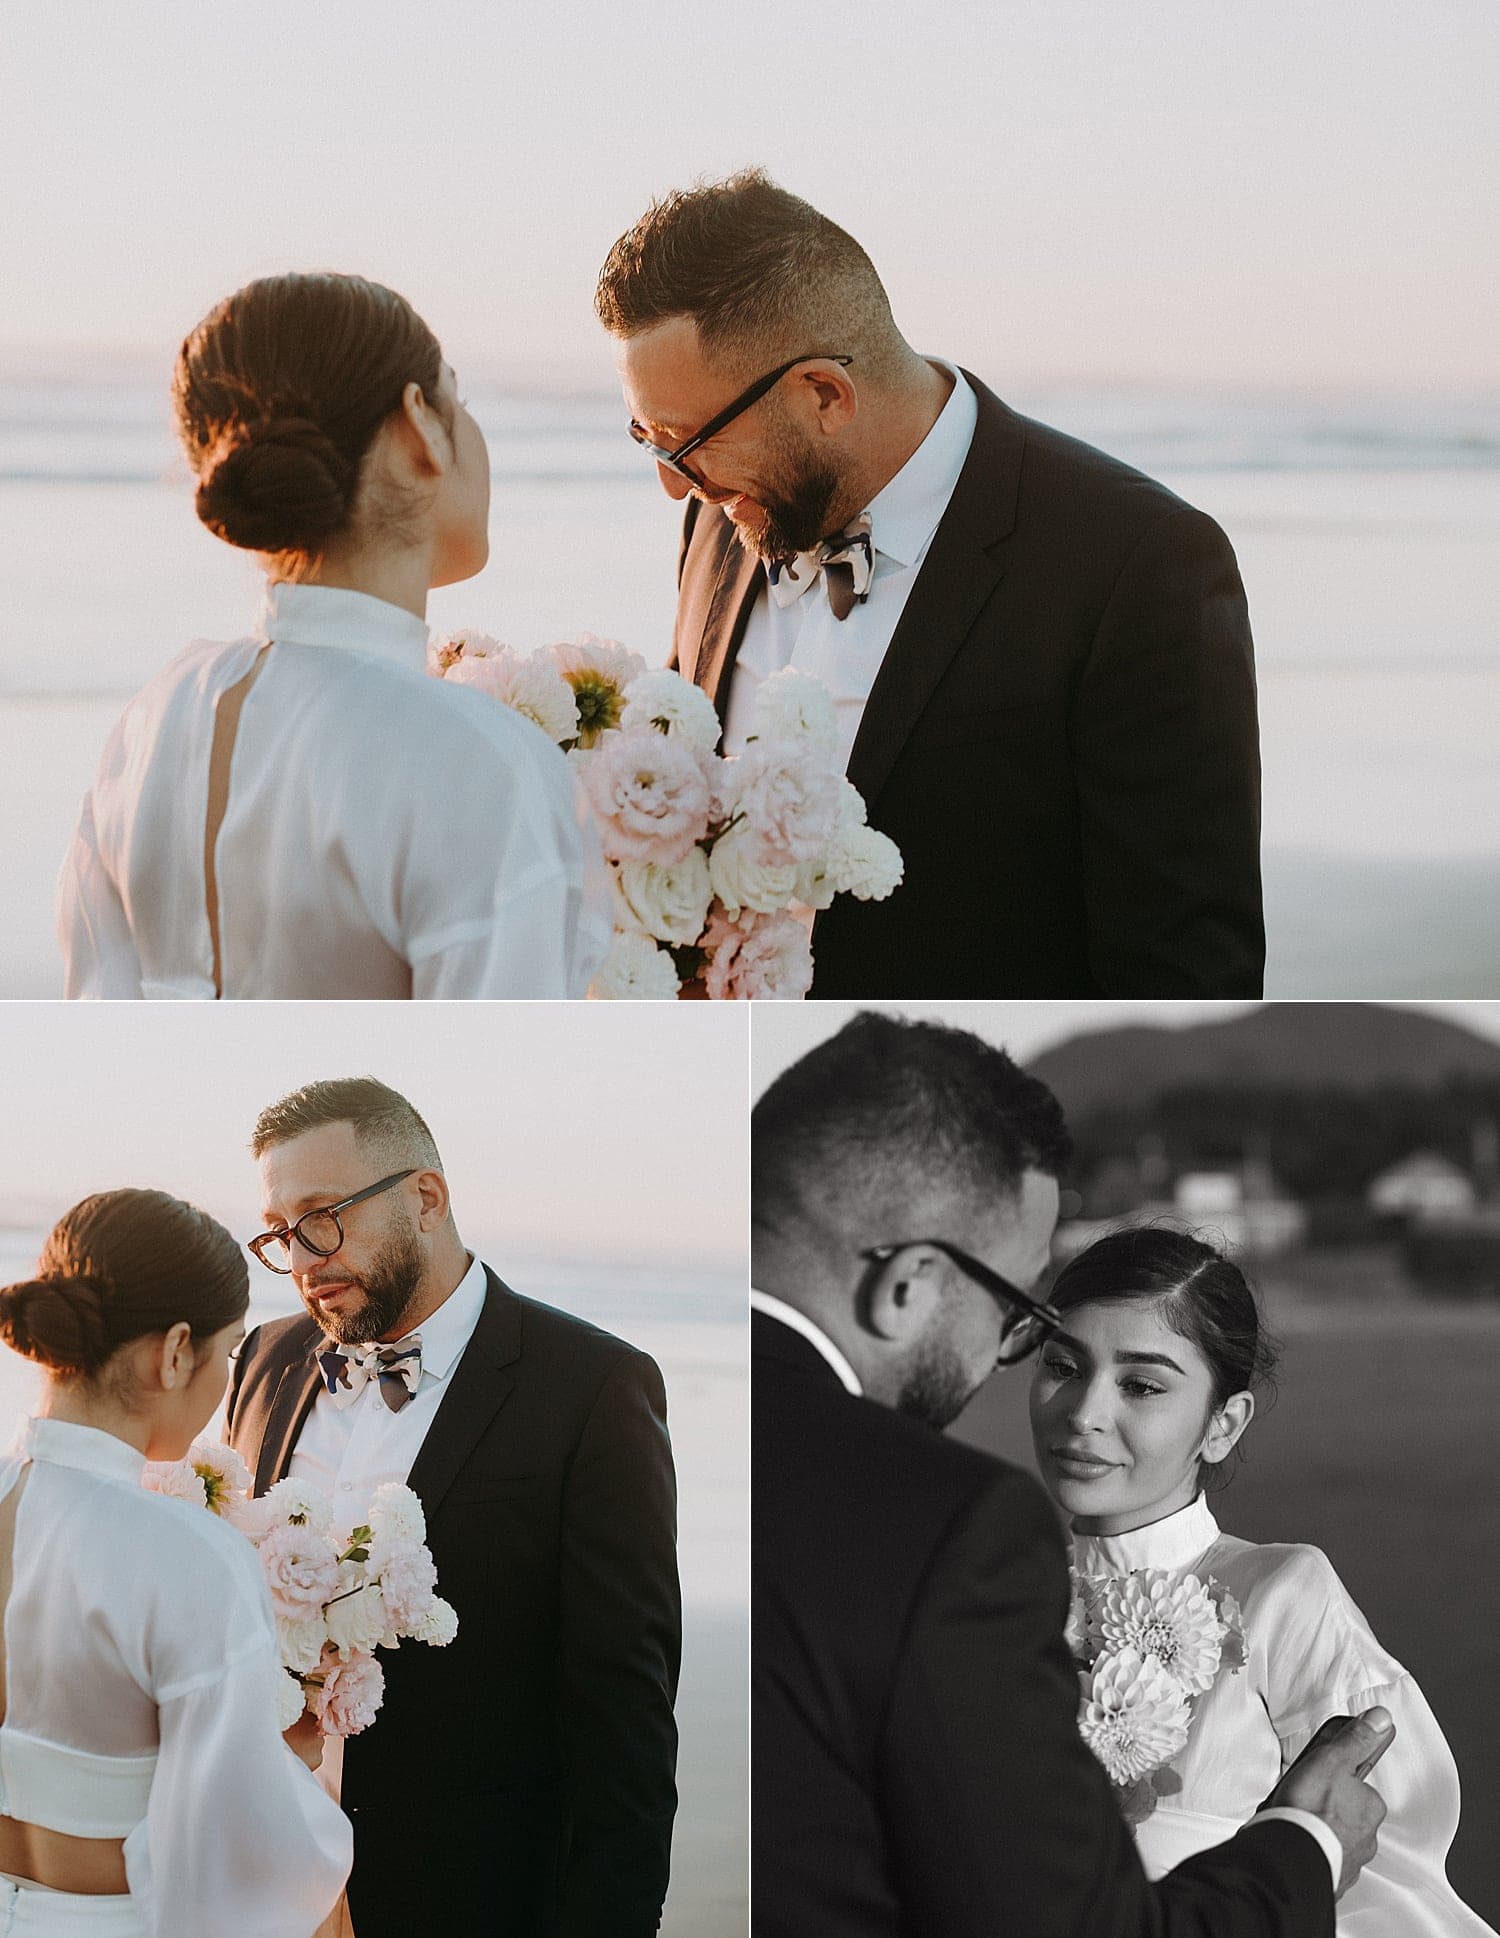 emotive and emotional photos of newlywed couple during their vows captured by marcela pulido portland oregon wedding photographer